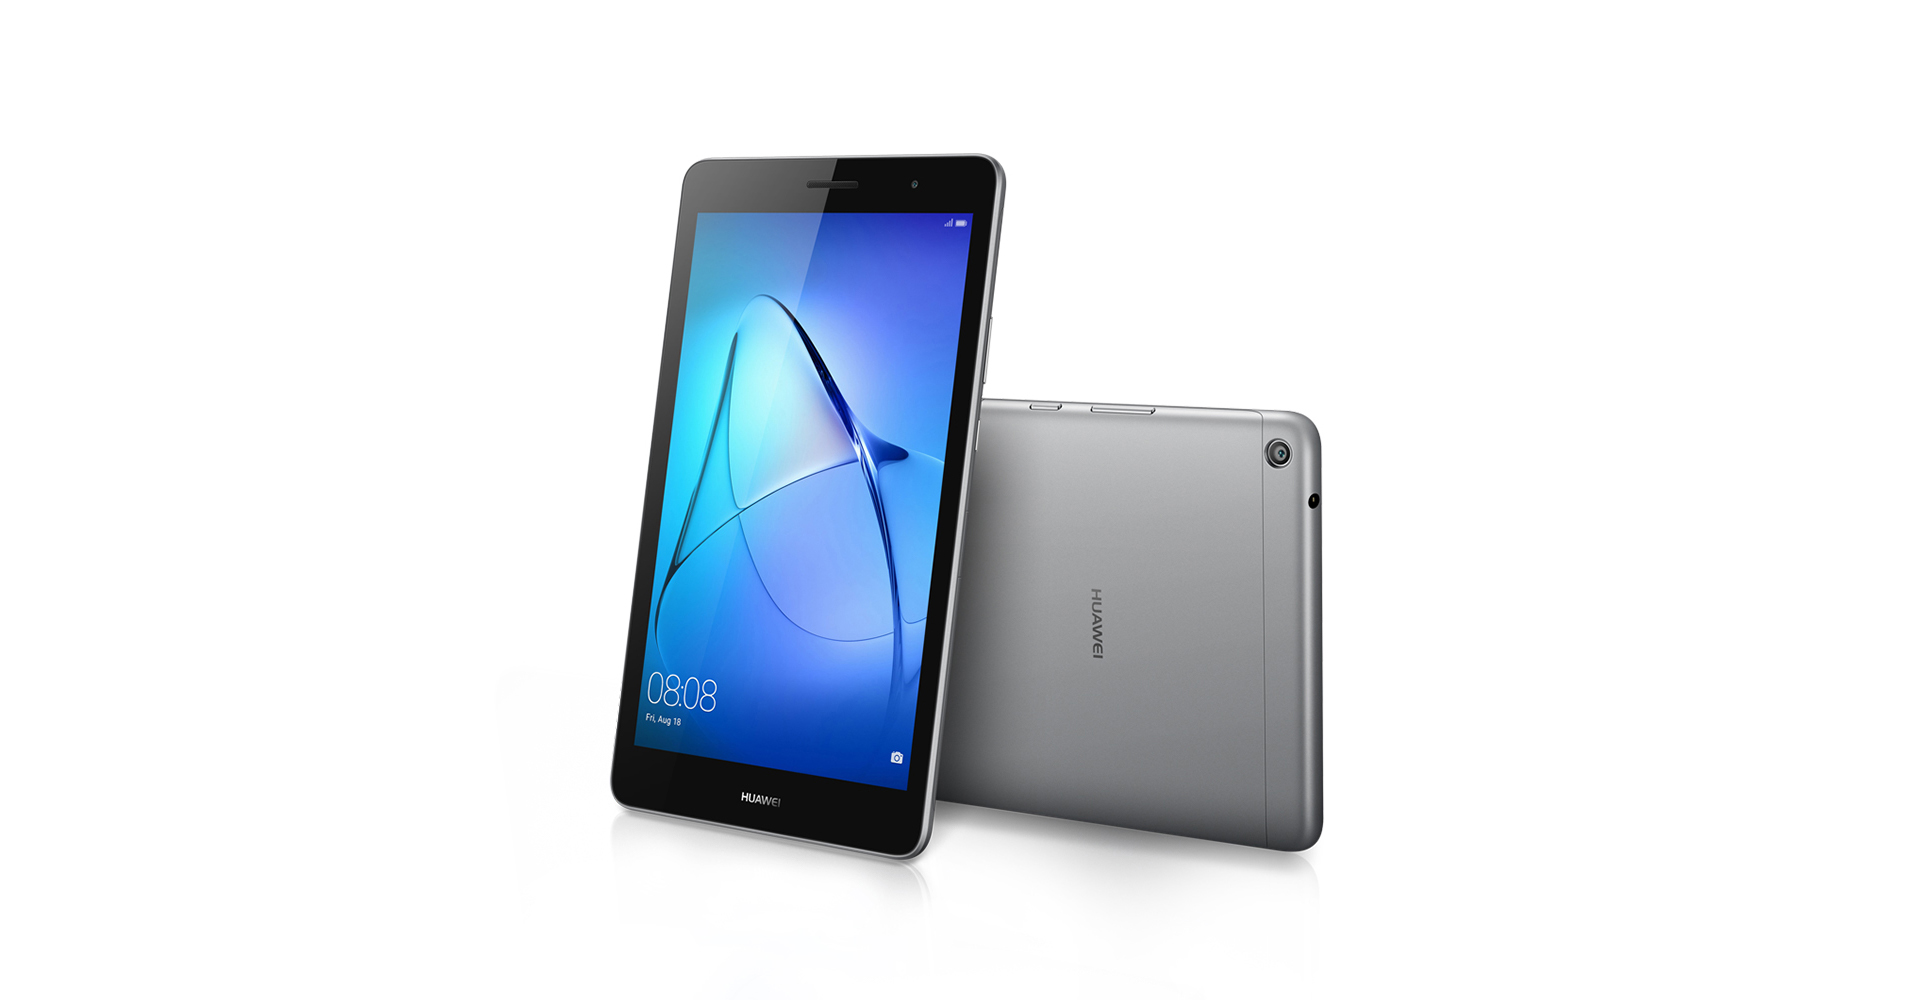 HUAWEI MediaPad T3, IPS full HD display, 8 inch android tablet